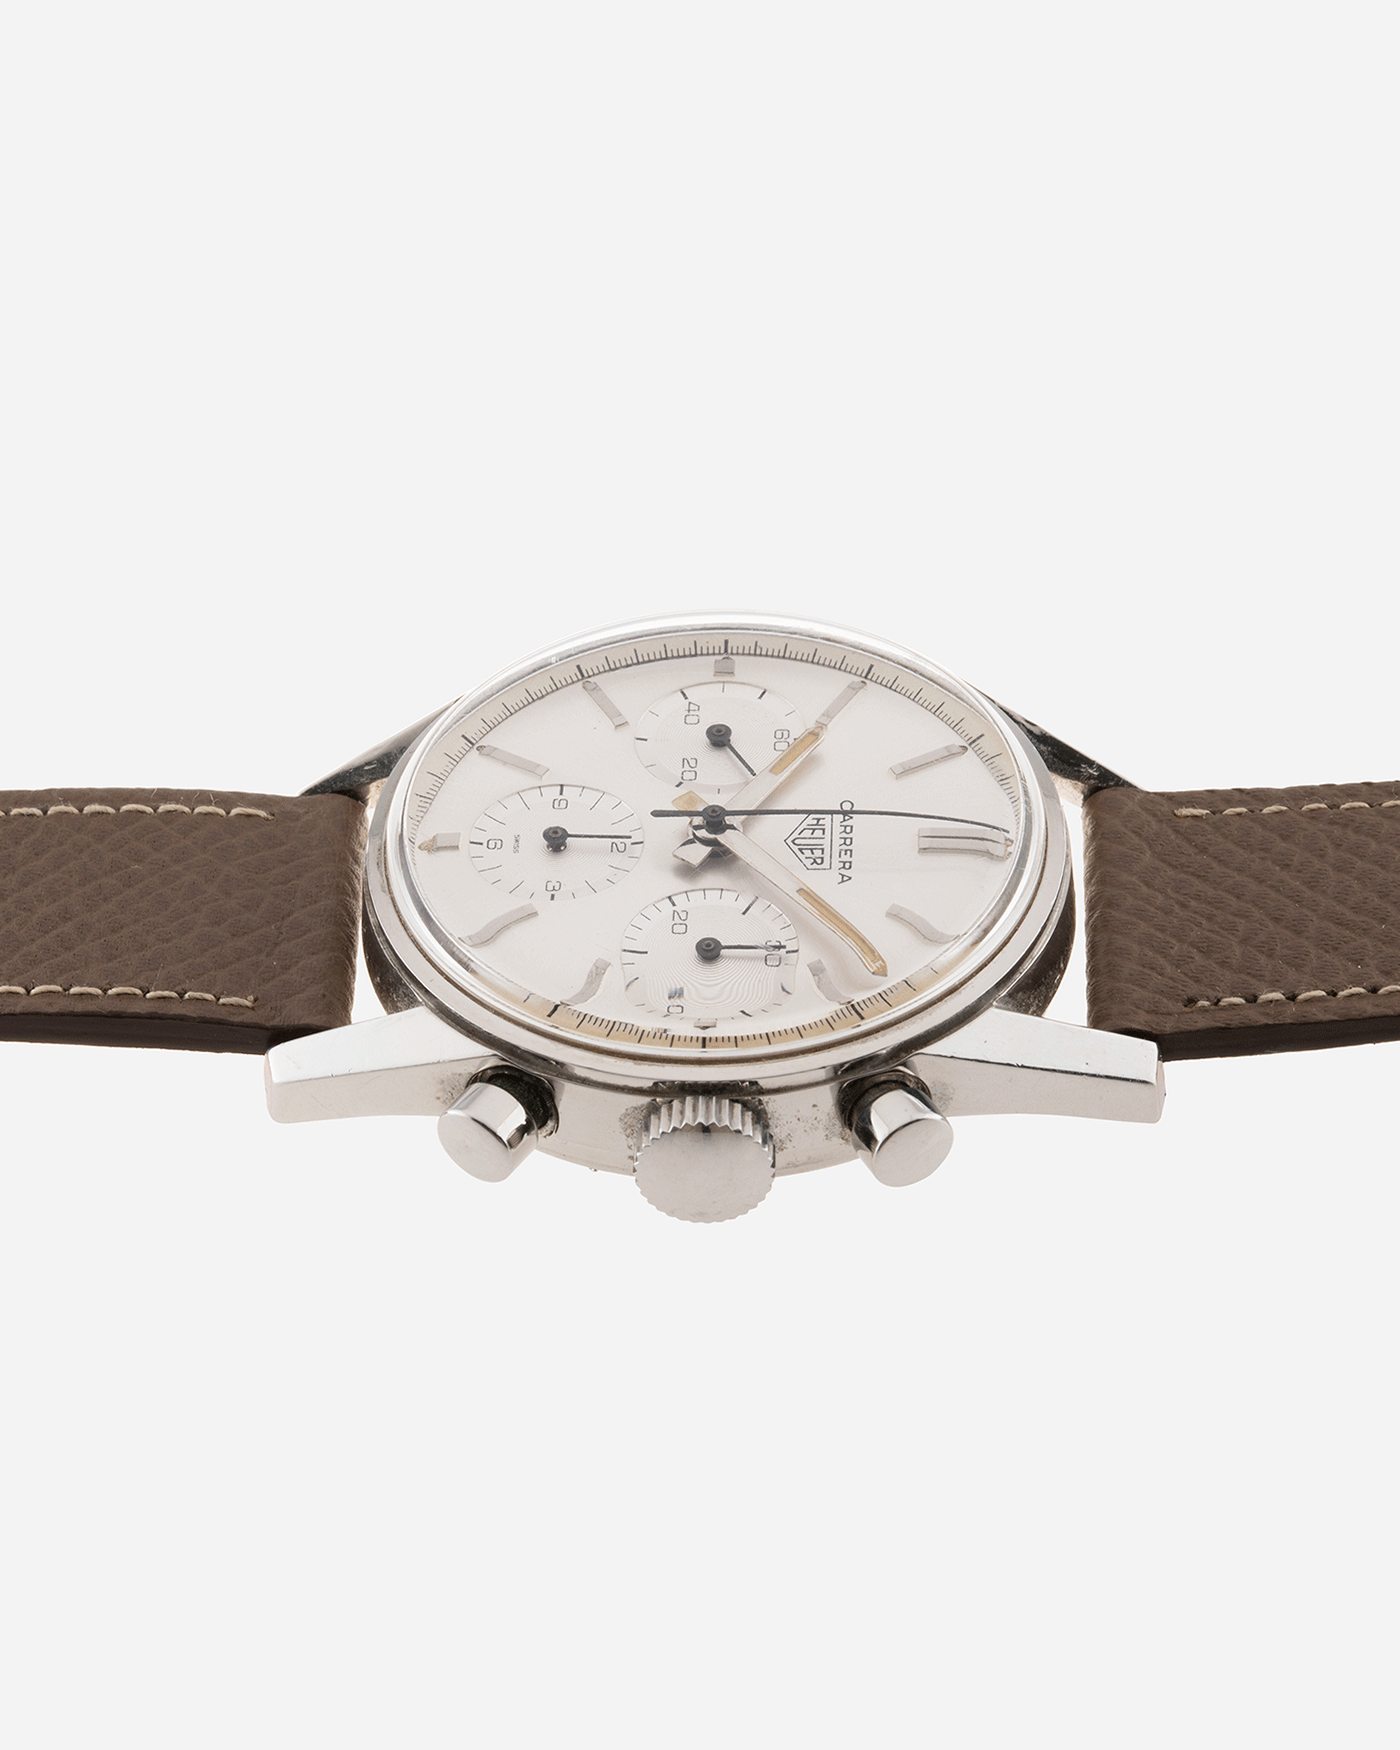 Brand: Heuer Year: 1960’s Model: Carrera Reference Number: 2447S Material: Stainless Steel Movement: Valjoux 72 Case Diameter: 36mm Lug Width: 18mm Bracelet/Strap: Nostime Grained Taupe